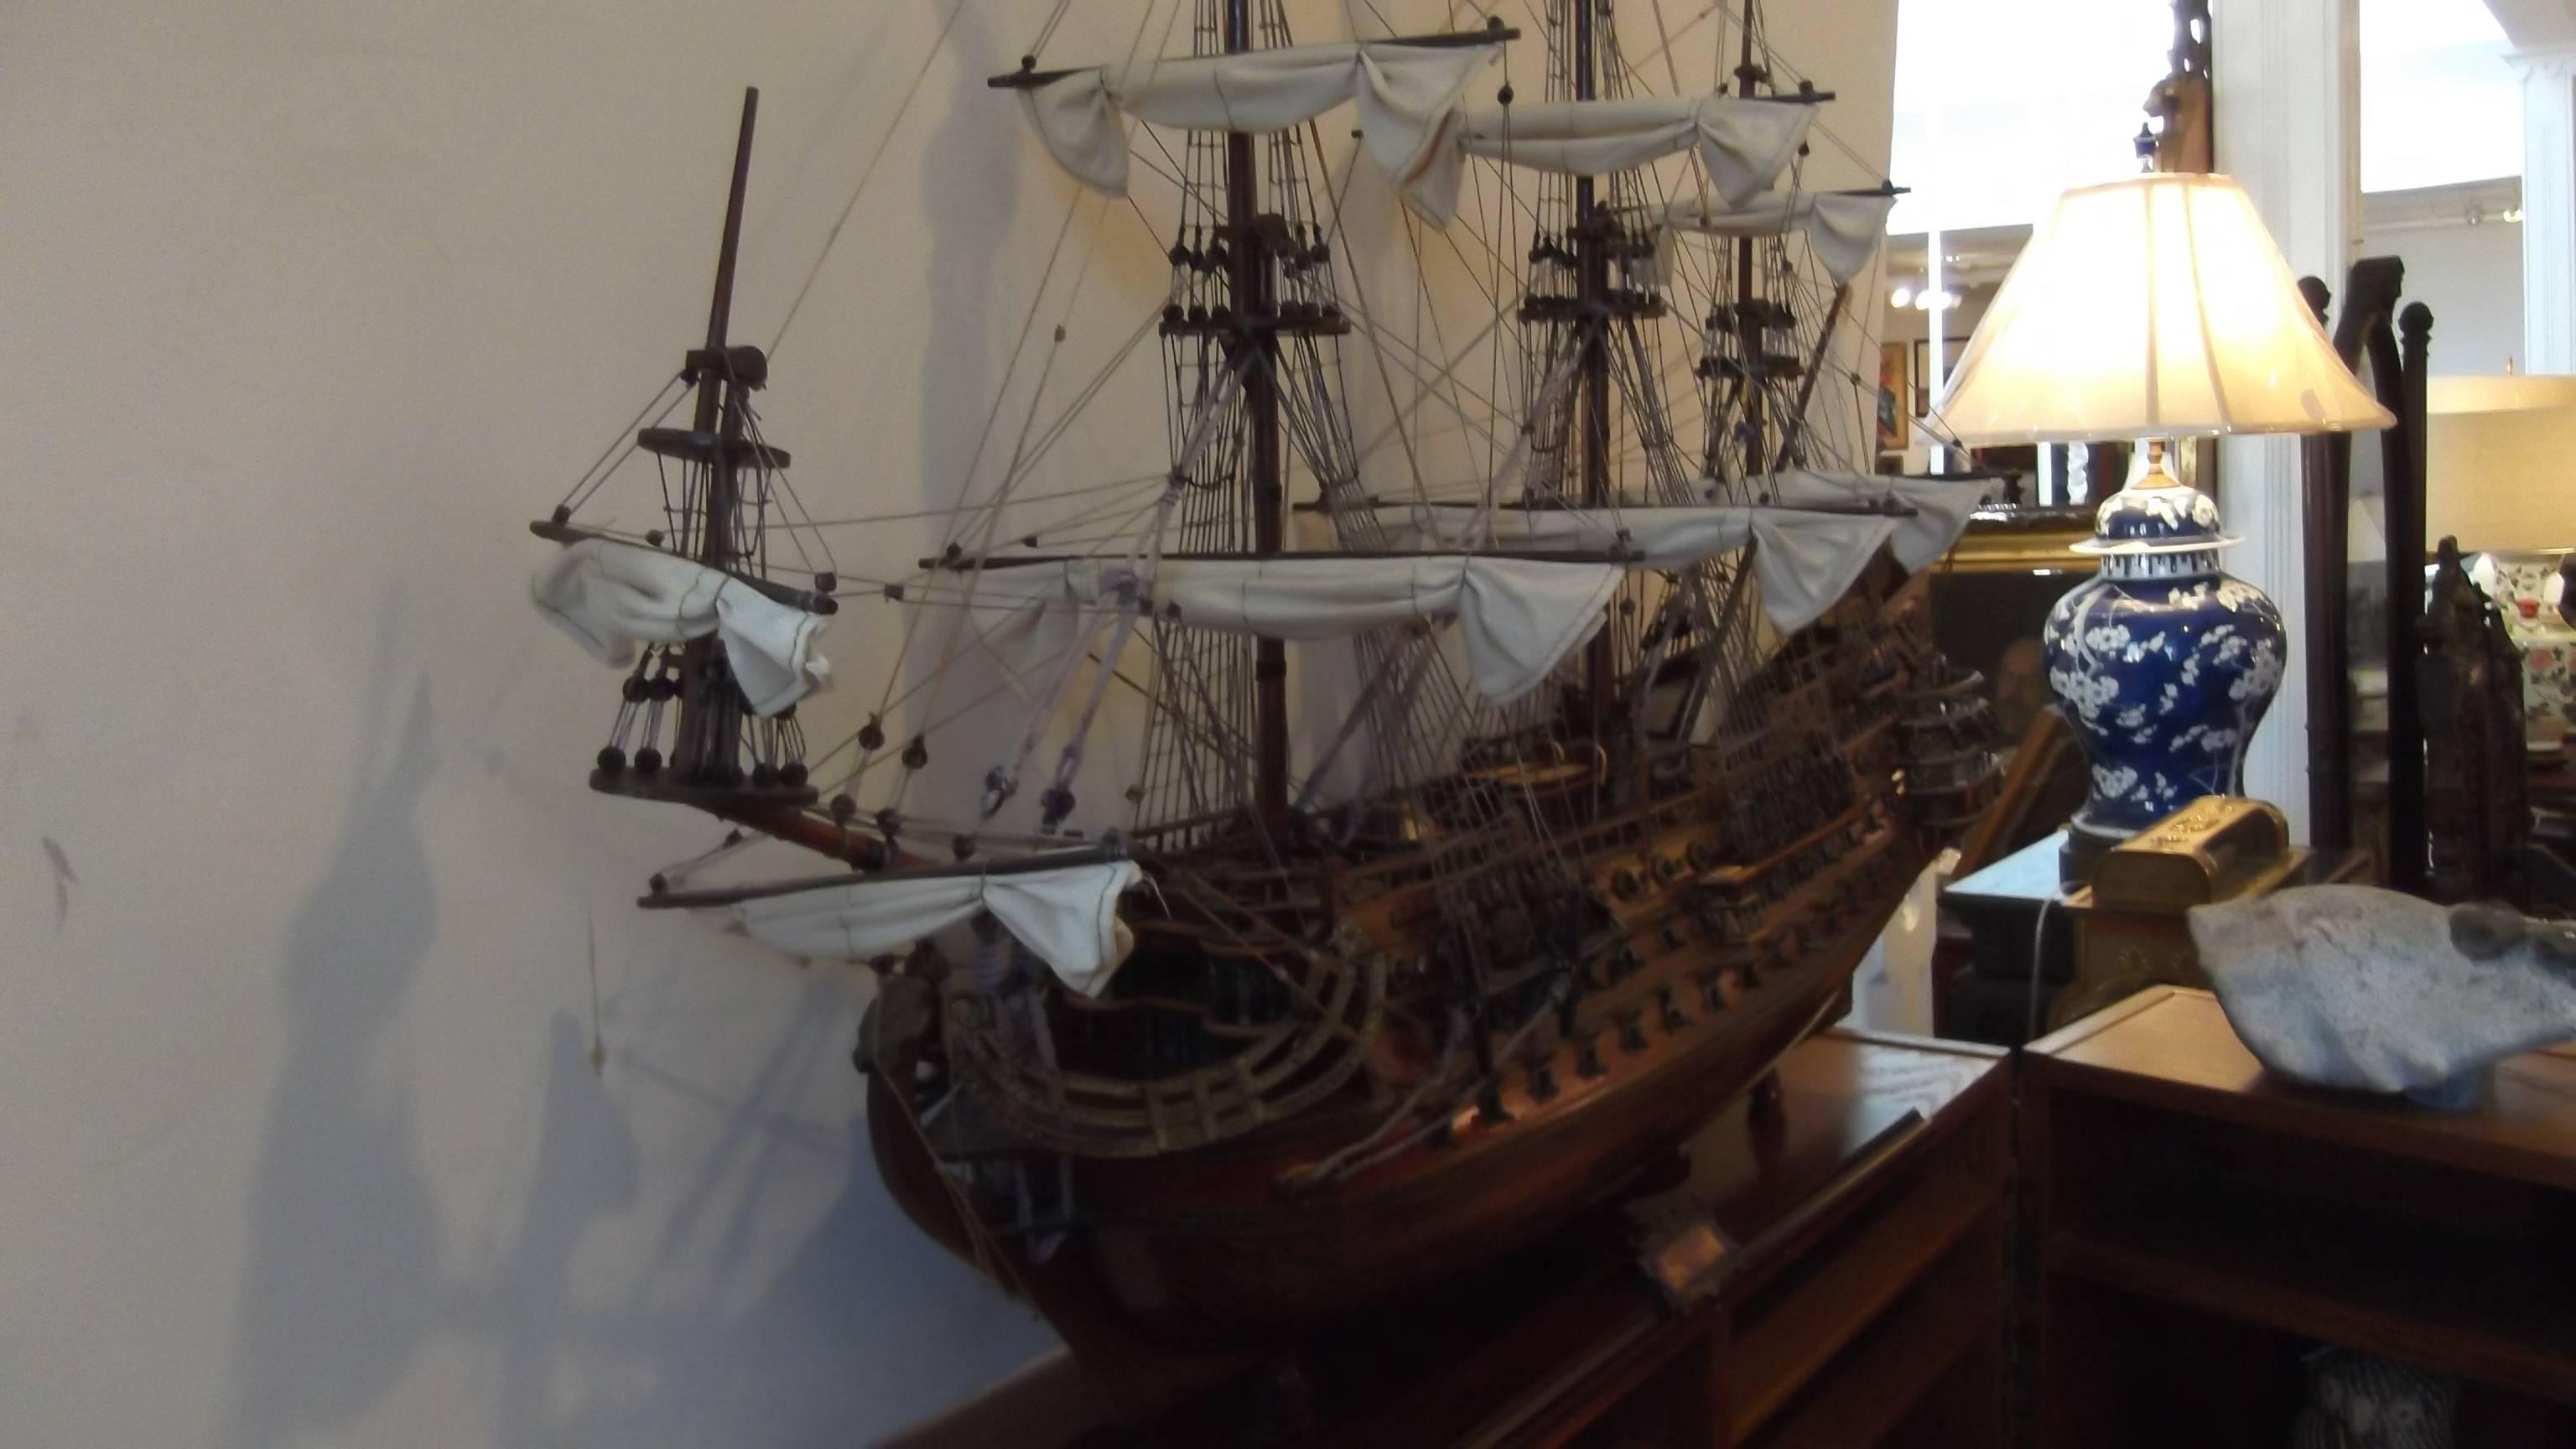 Incredible model of the Spanish war ship the San Felipe.

The San Felipe was one of the most beautiful Spanish galleons of the 17th century. Being the lead ship of the famed Spanish Armada it could displace about 1000 tons. Not only was the San